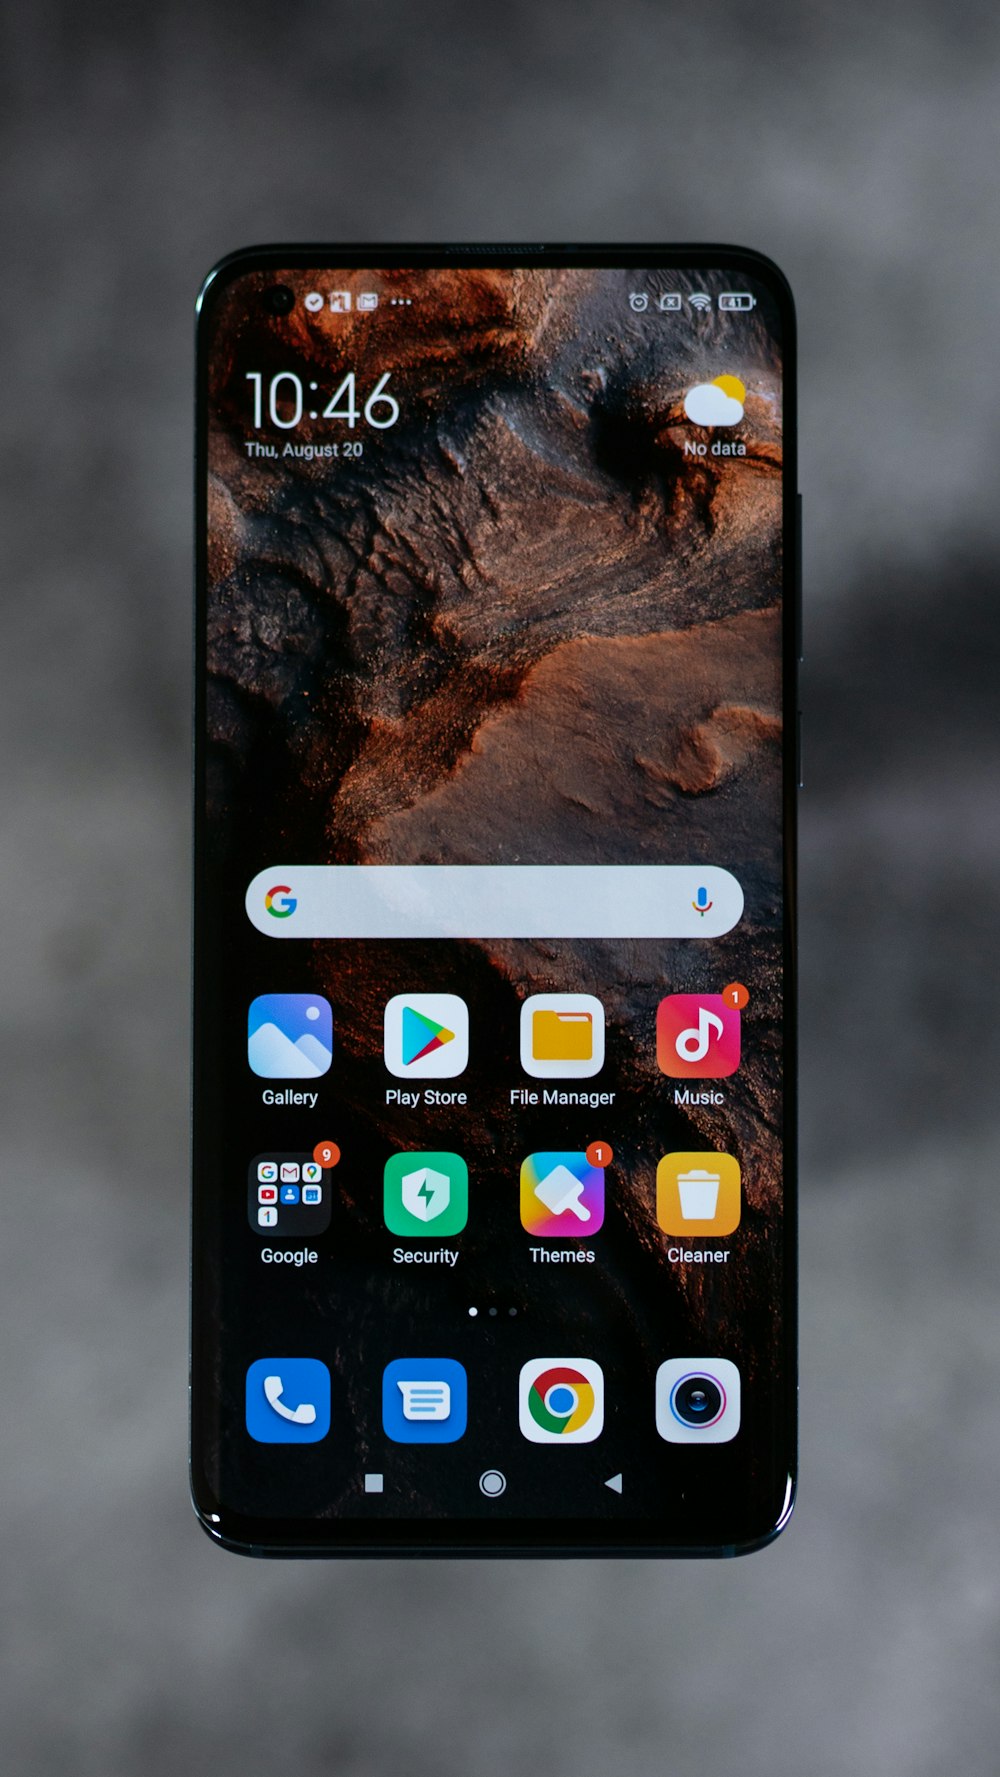 iphone screen showing icons on screen